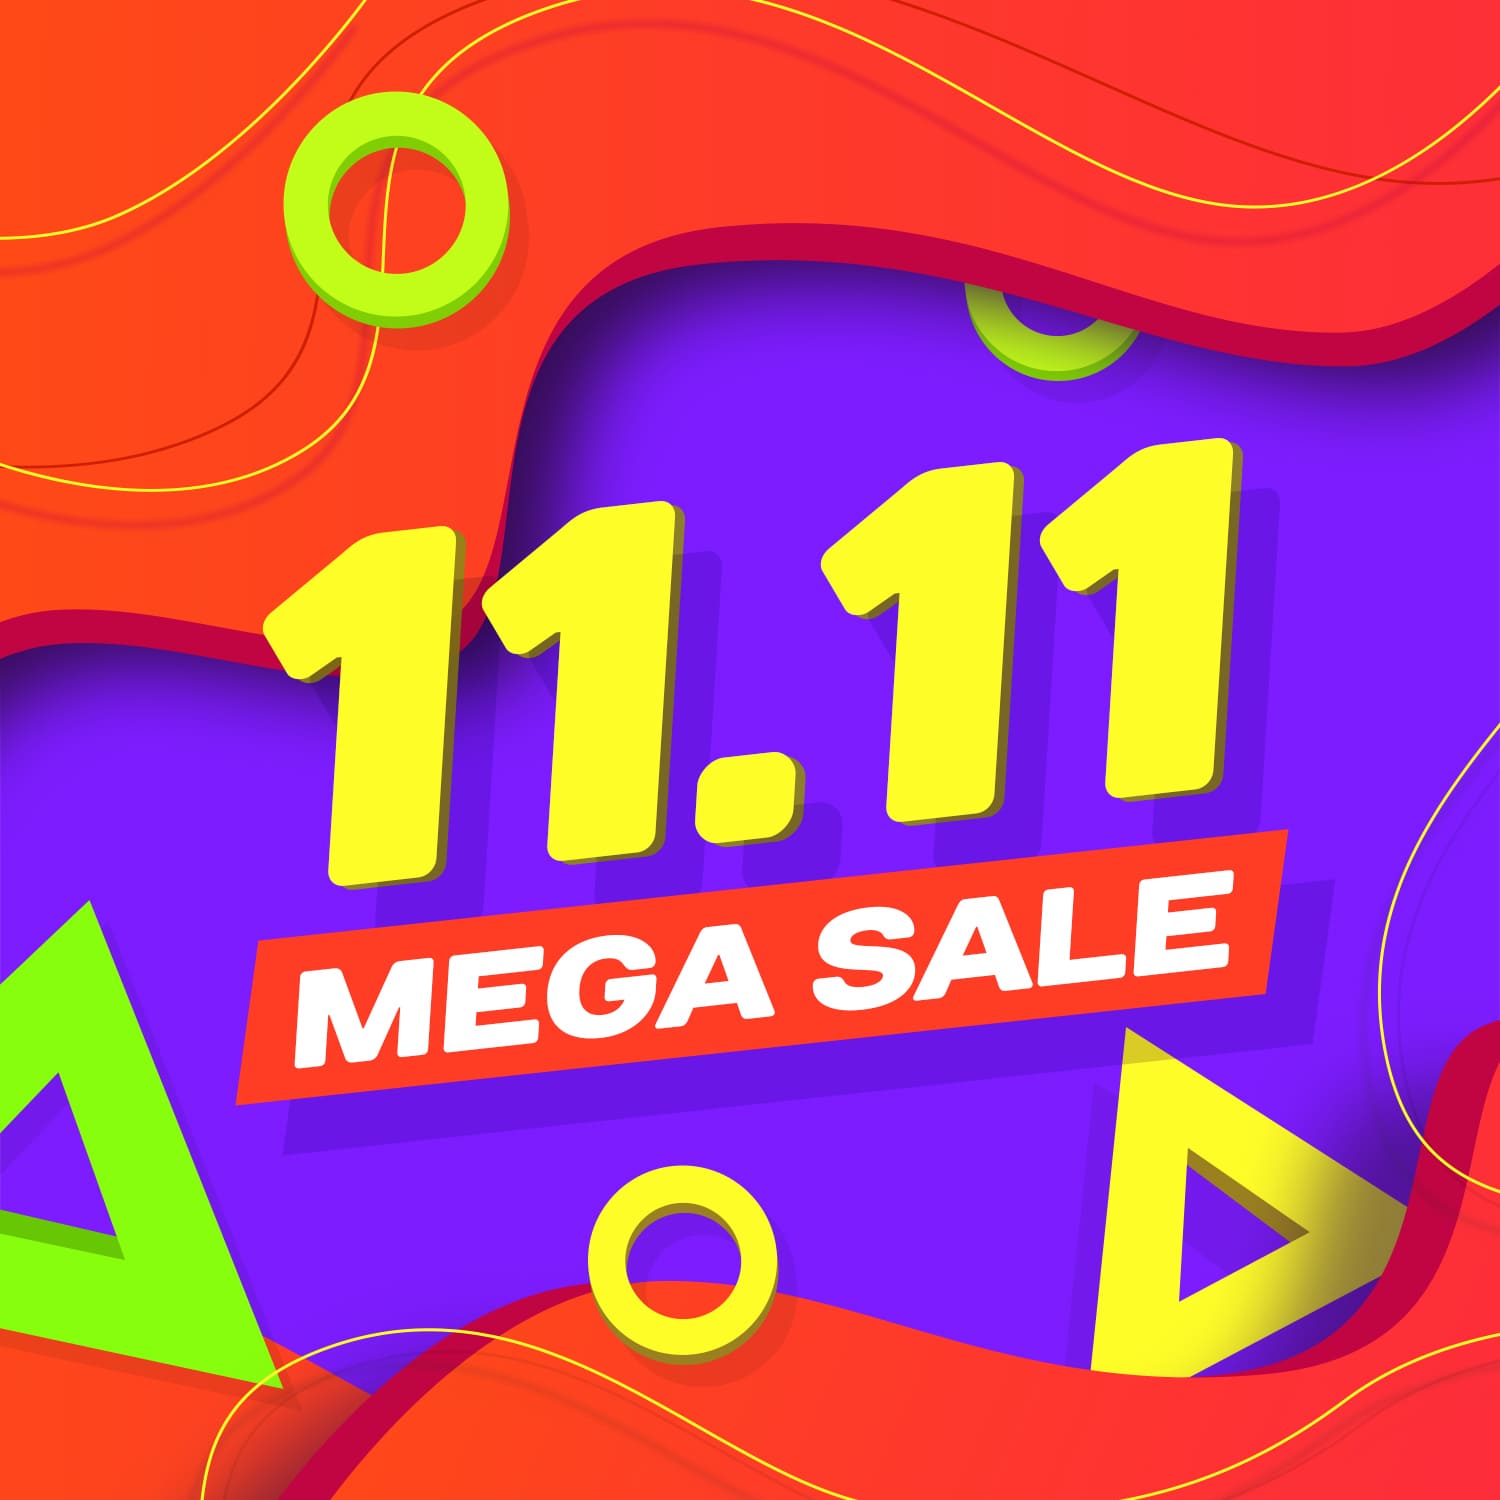 Free 11.11 Shopping Day Banners cover image.